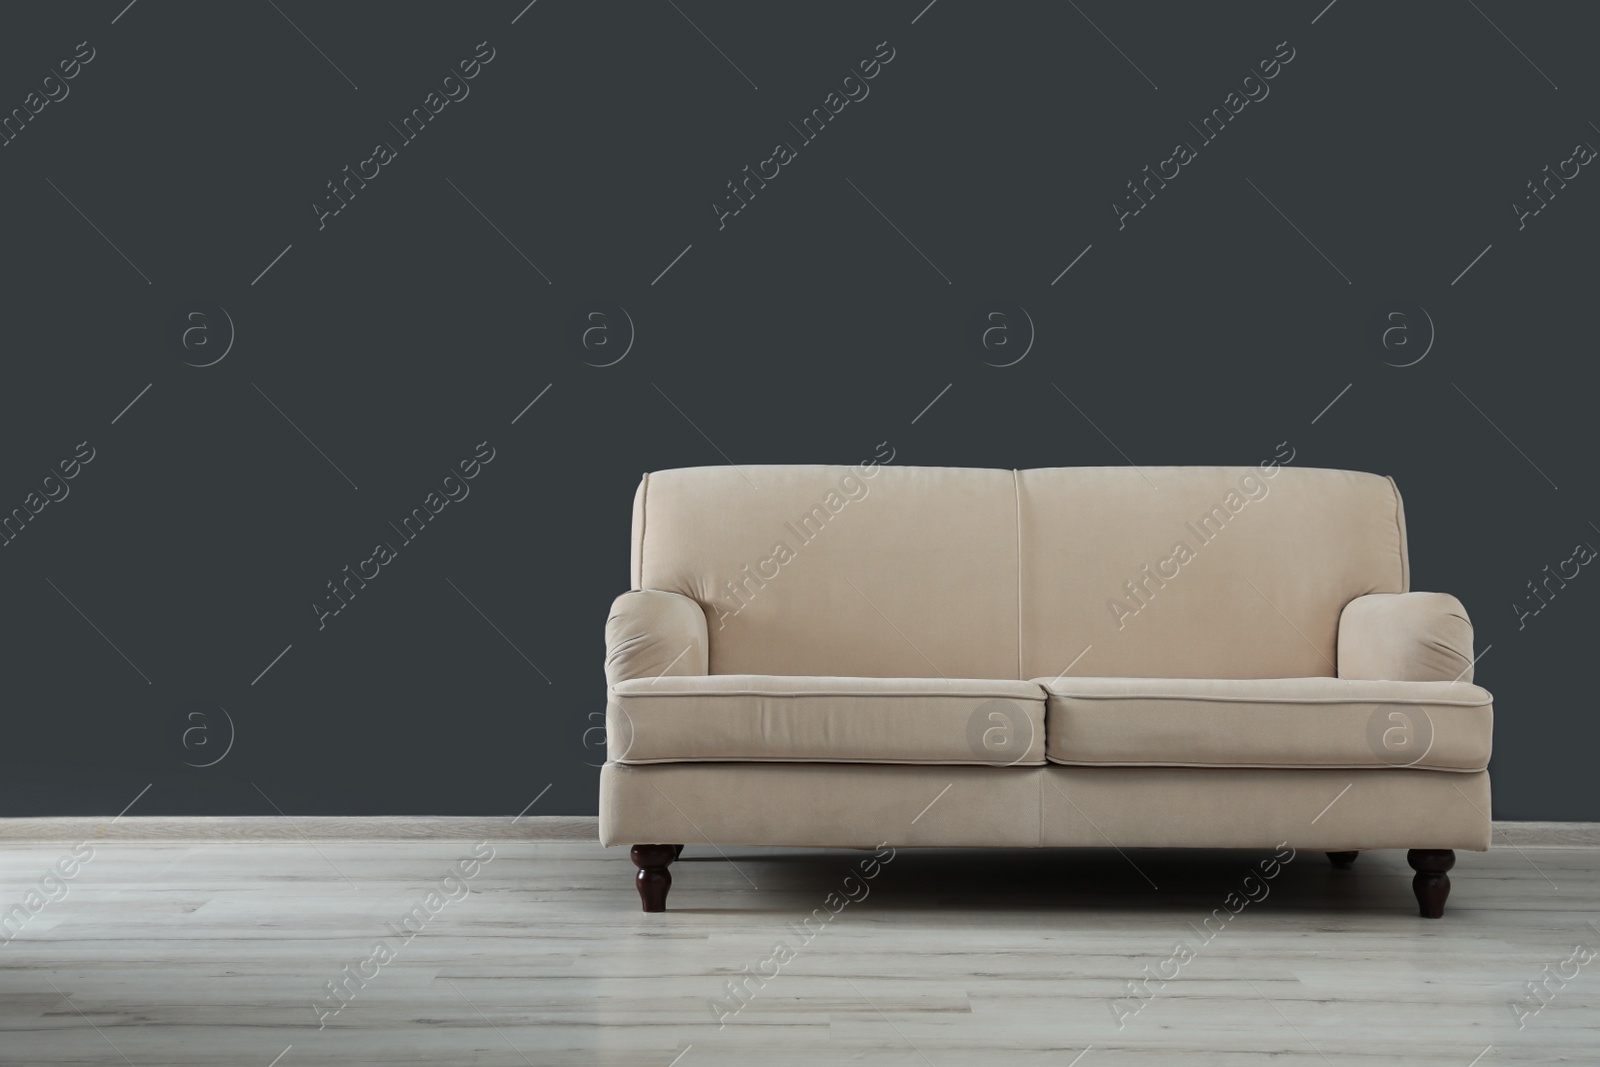 Photo of Room interior with comfortable sofa near gray wall. Space for text